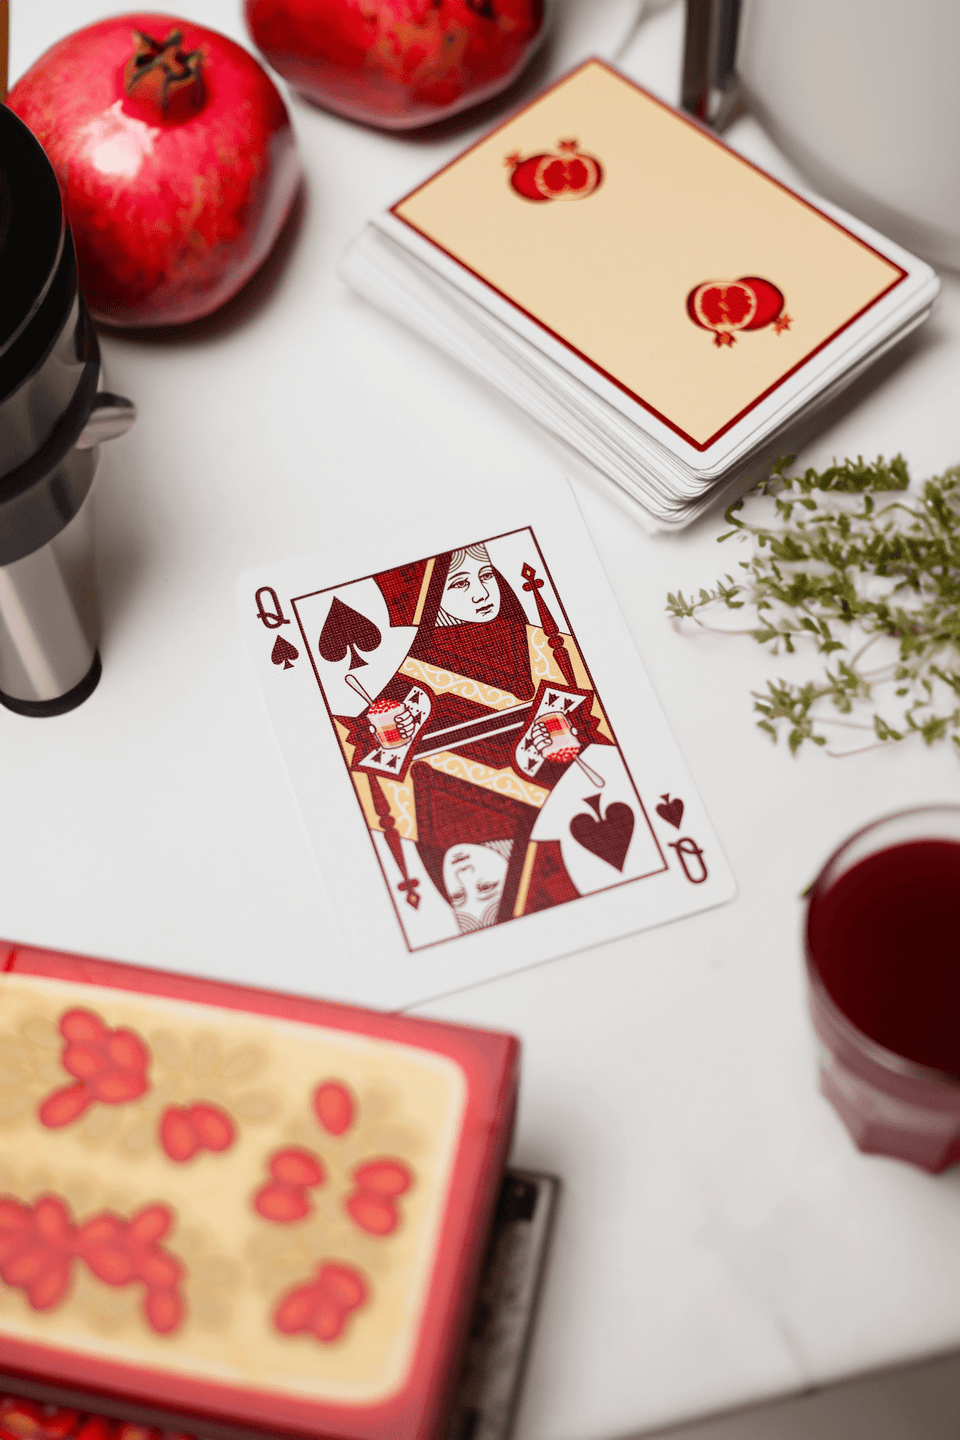 Palmegranate Playing Cards